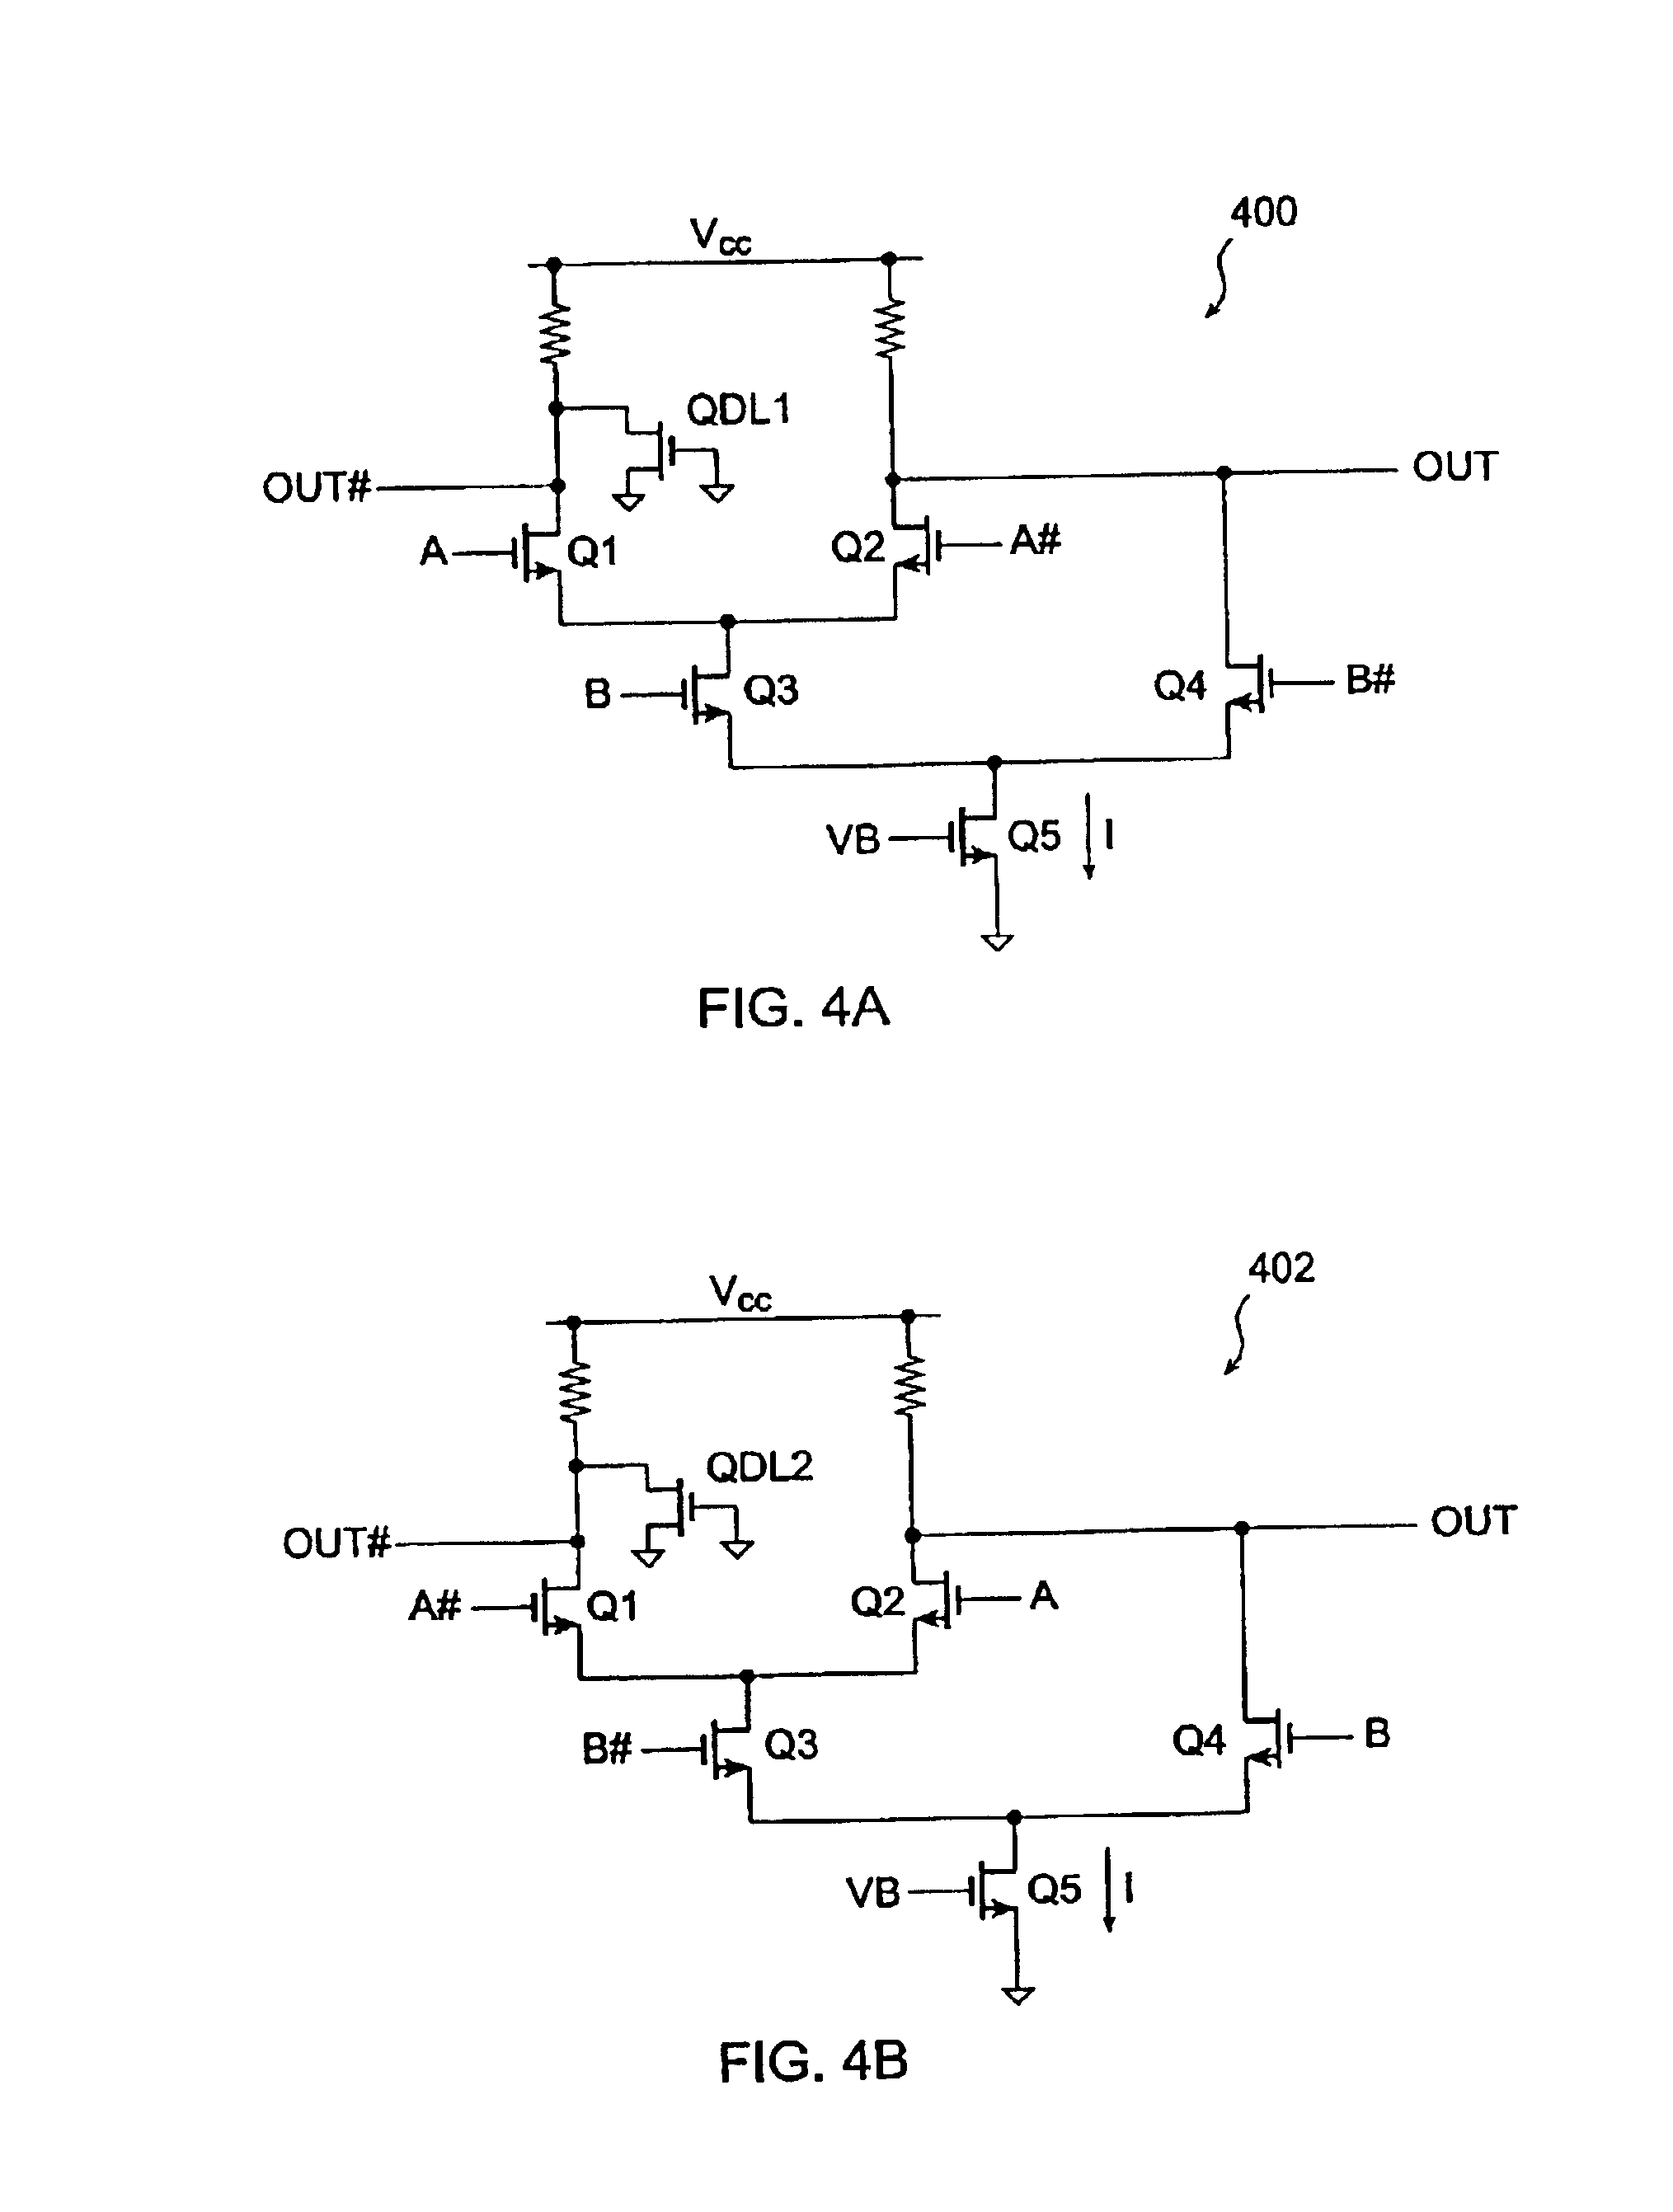 Current-controlled CMOS circuit using higher voltage supply in low voltage CMOS process